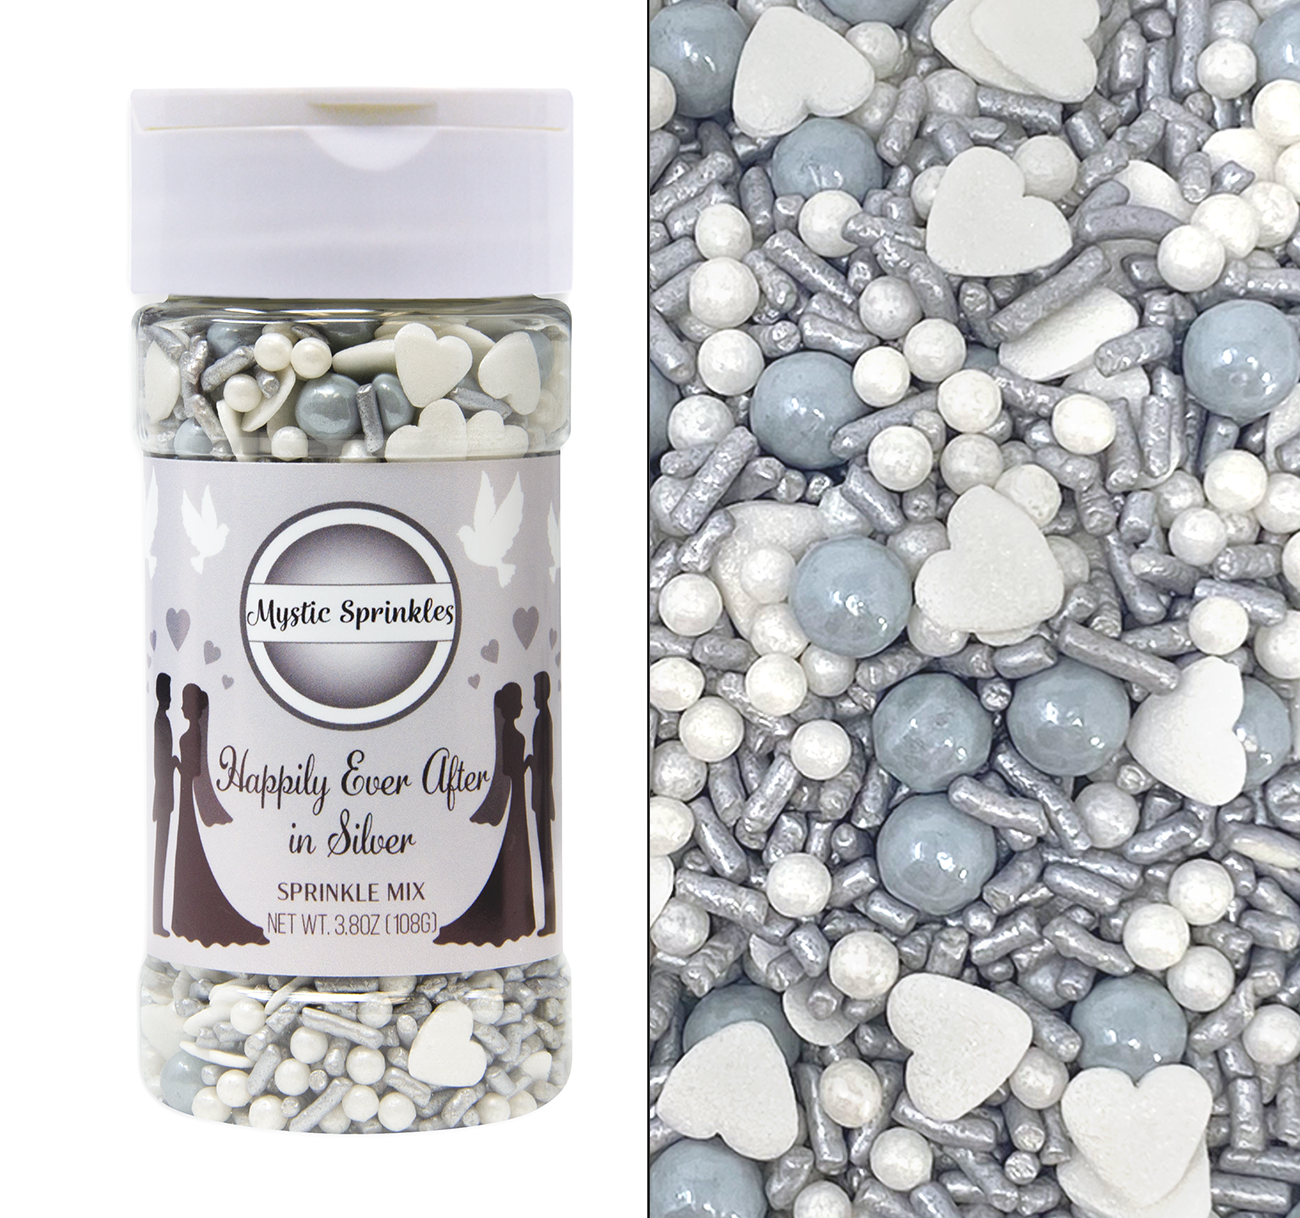 Happily Ever After in Silver Sprinkle Mix 3.8oz